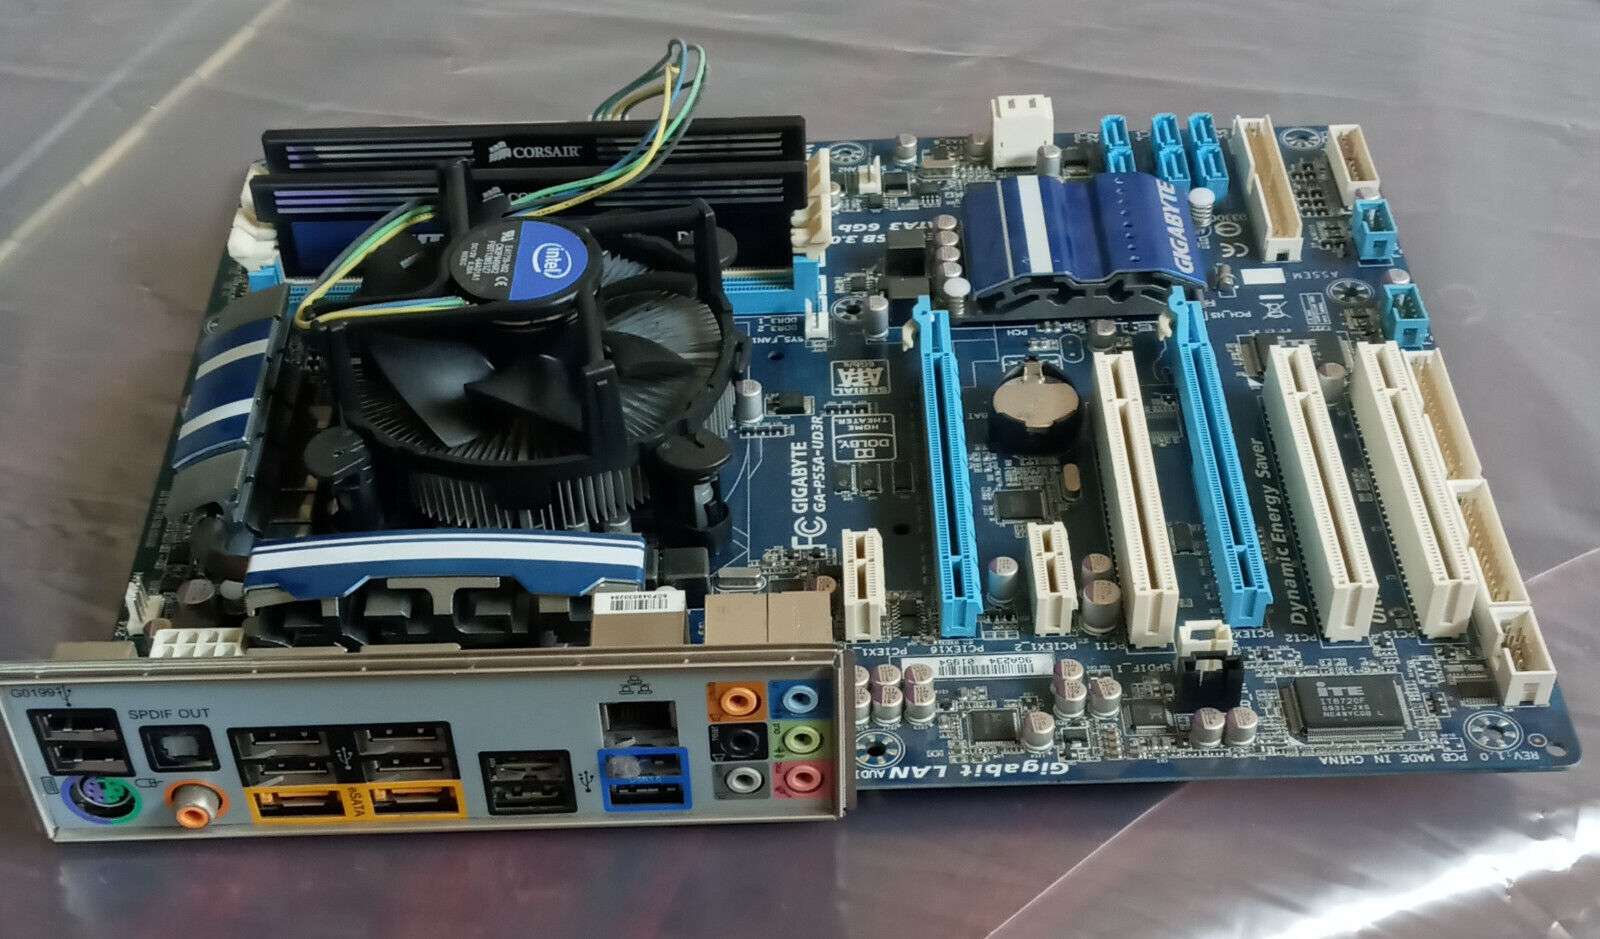 Gigabyte Intel i7 Motherboard with 8GB RAM model GA-P55A-UD3R - Clean and Tested